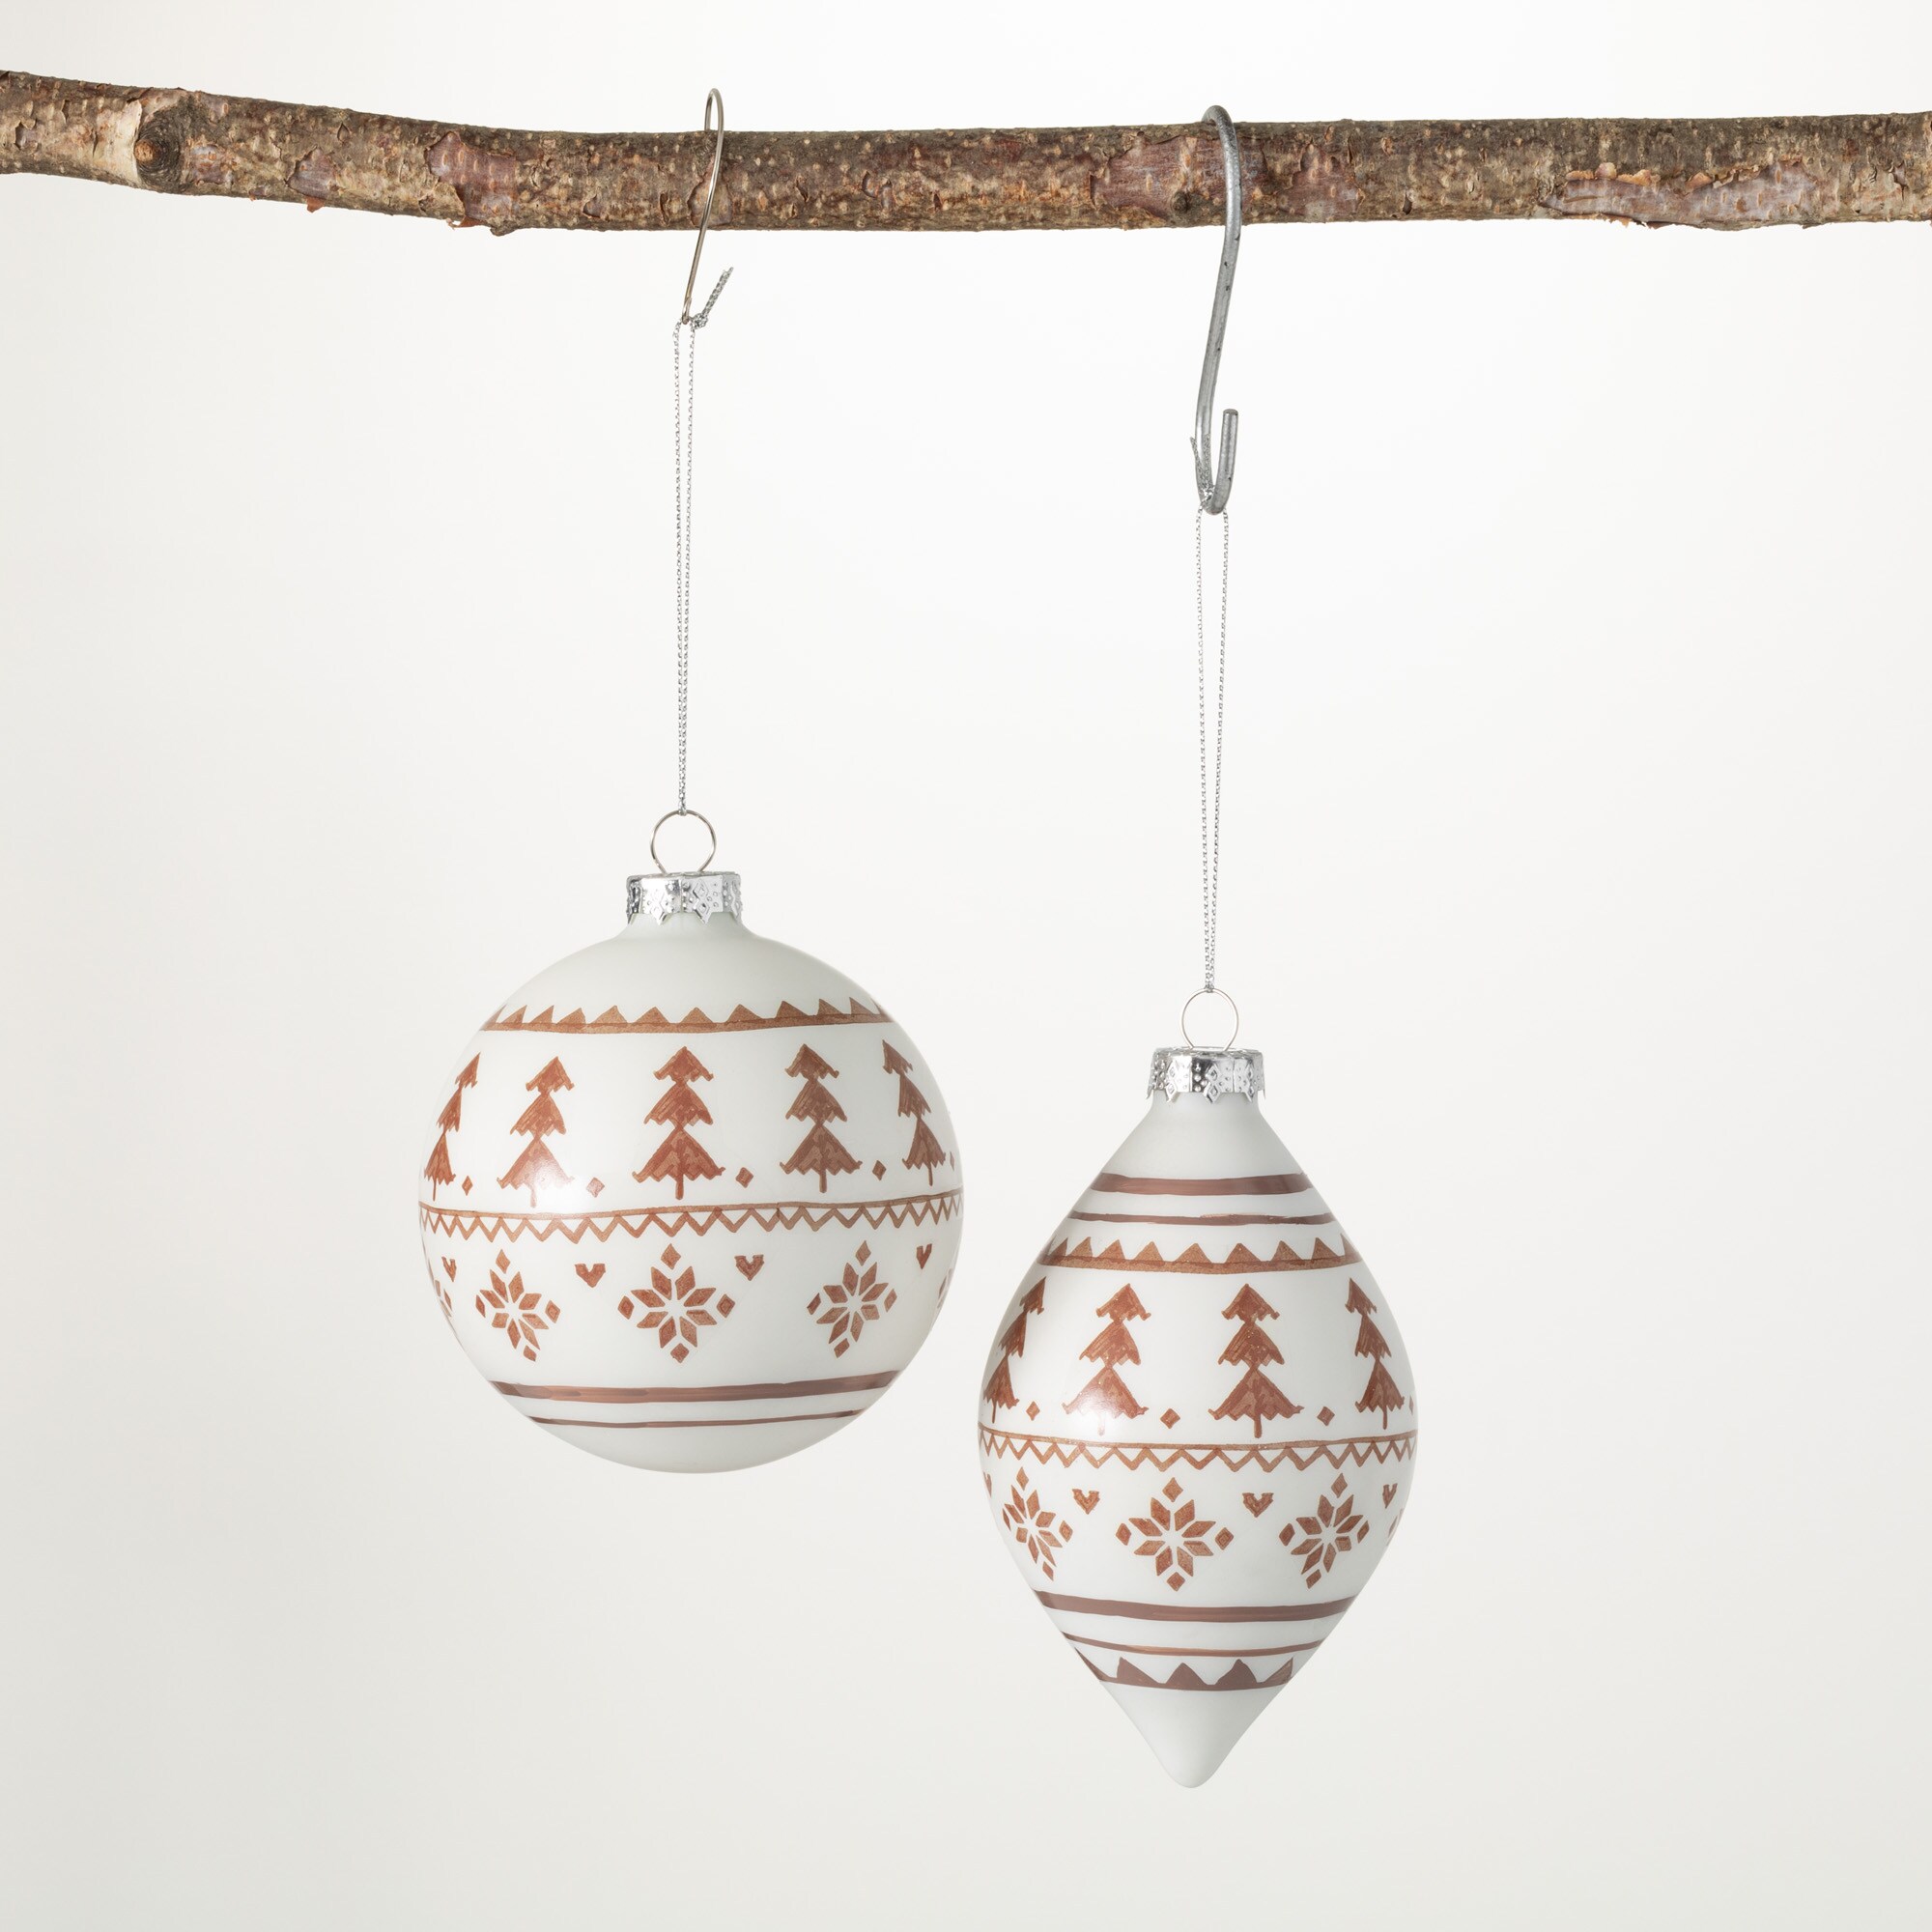 Set of 4 Painted Wooden Ball and Finial Ornaments by Lauren